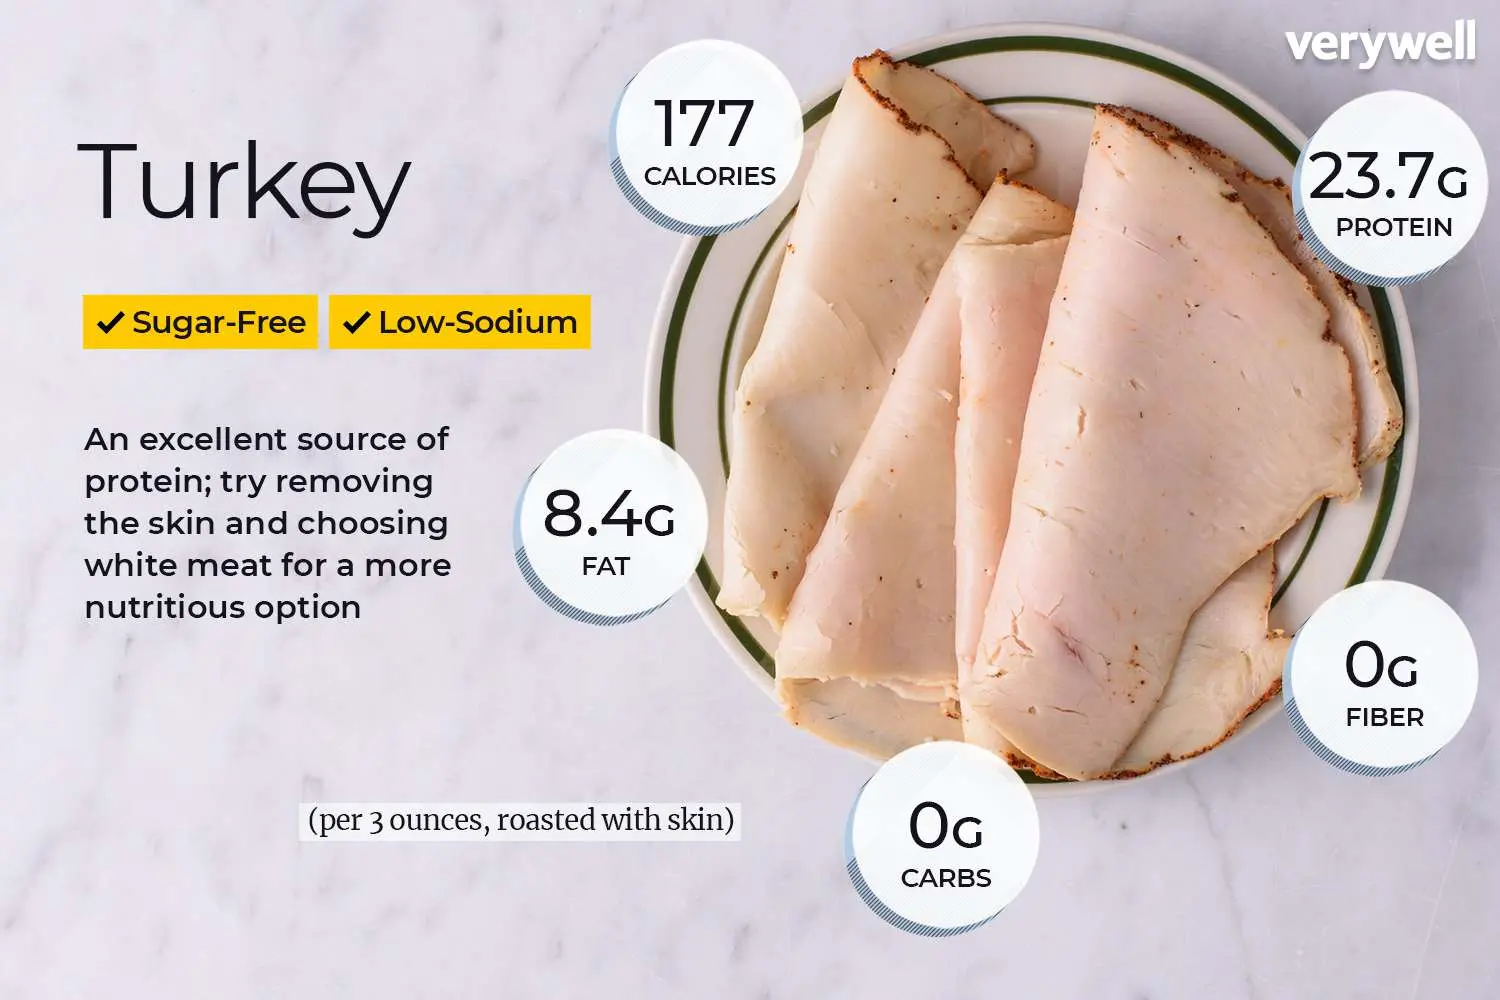 is smoked turkey good for weight loss - Is smoked turkey low in fat